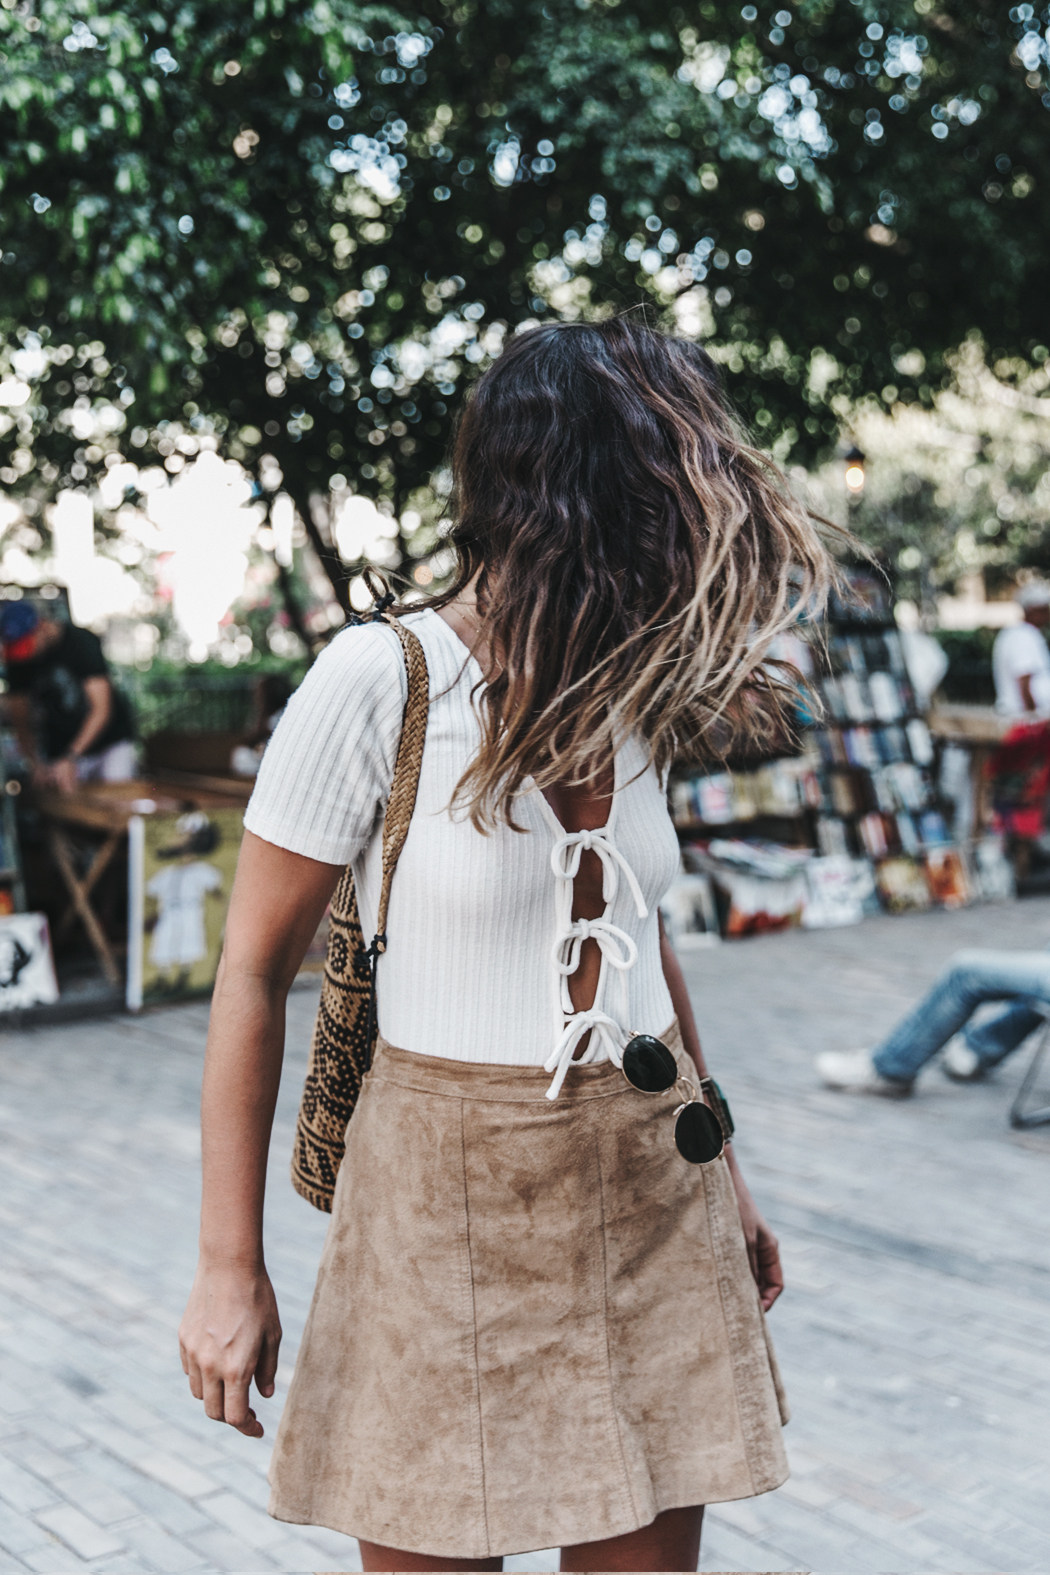 Cuba-Habana_Vieja-Suede_Skirt-Lace_UP_Body-Privacy_Please-Wedges-Outfit-Collage_Vintage-Travels-Street_Style-Backpack-51